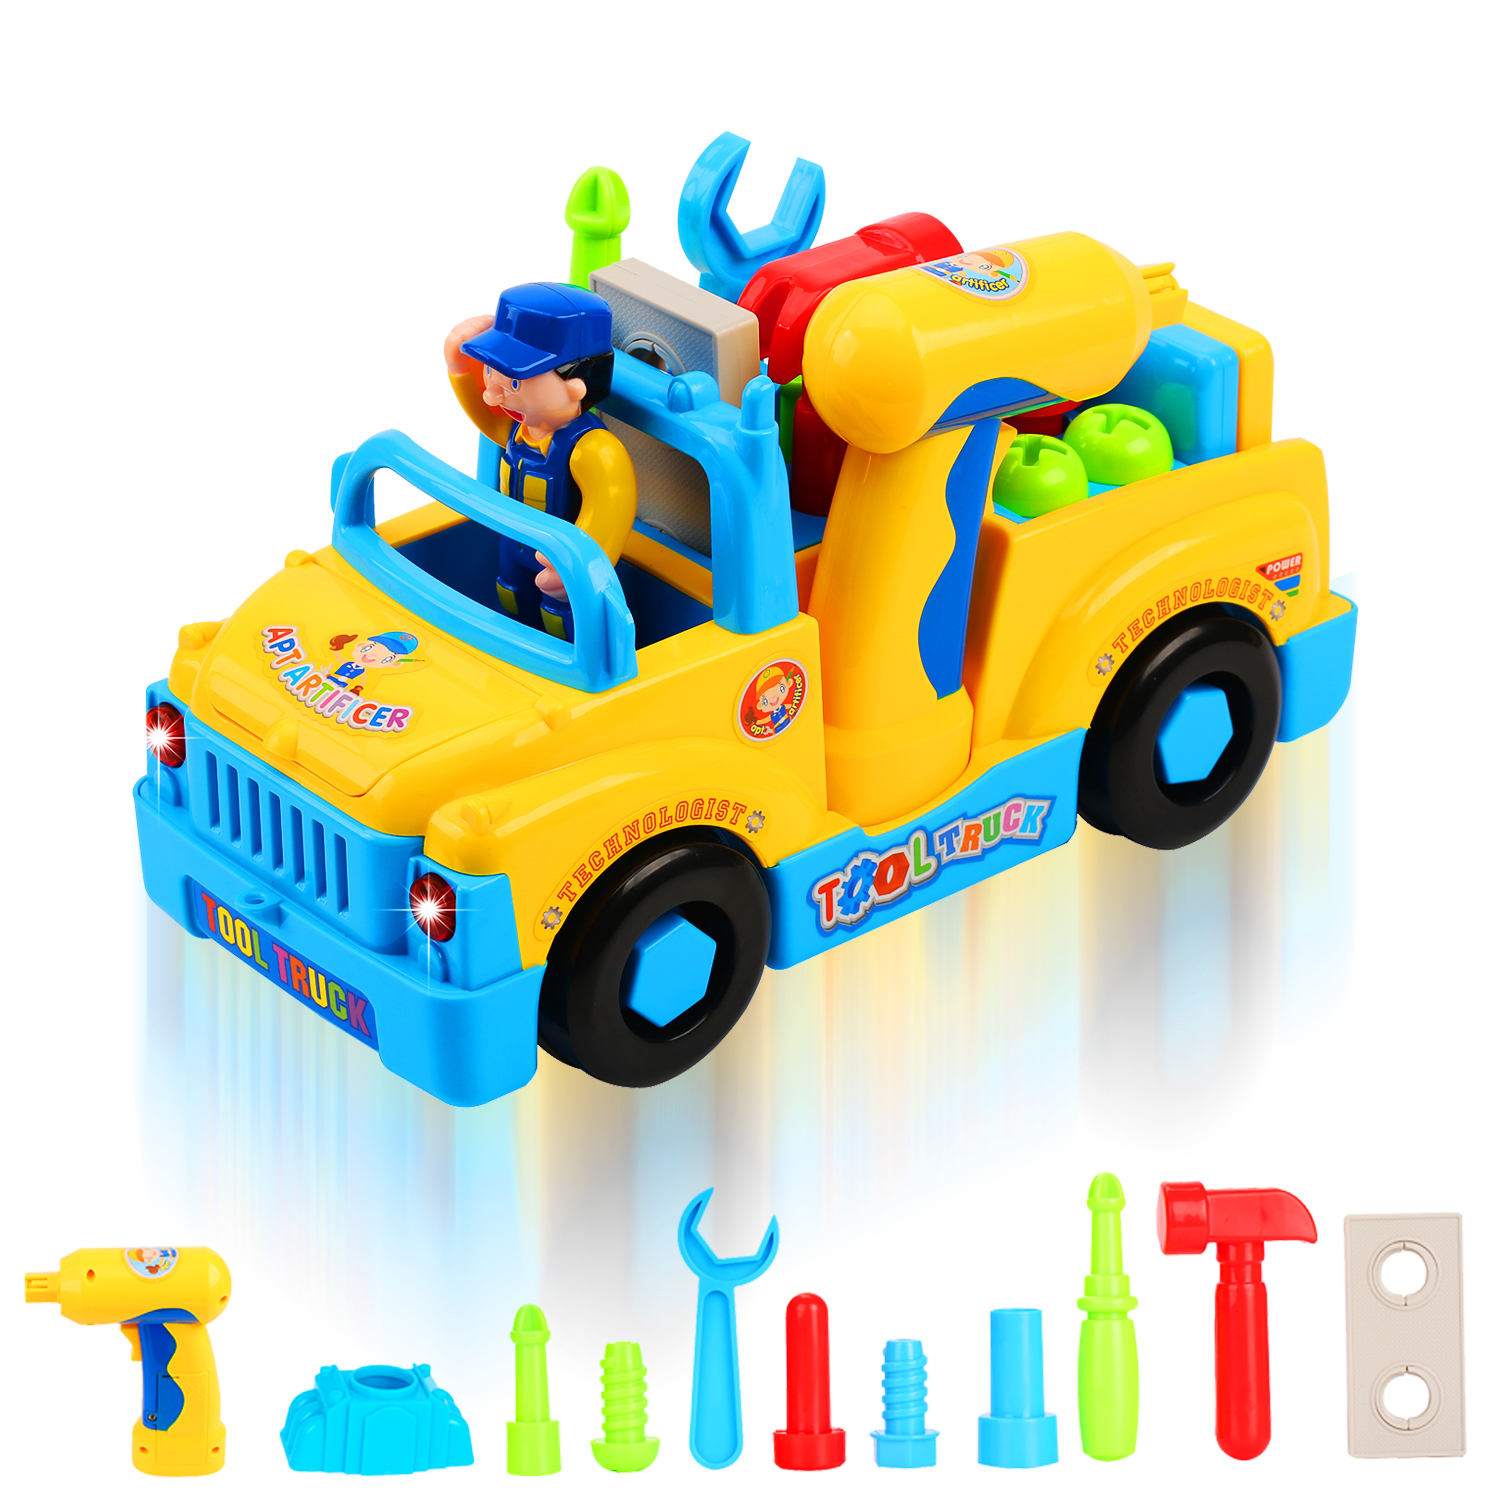 QuadPro Truck Take Apart Toys for Boys Girl With Electric Drill and ...